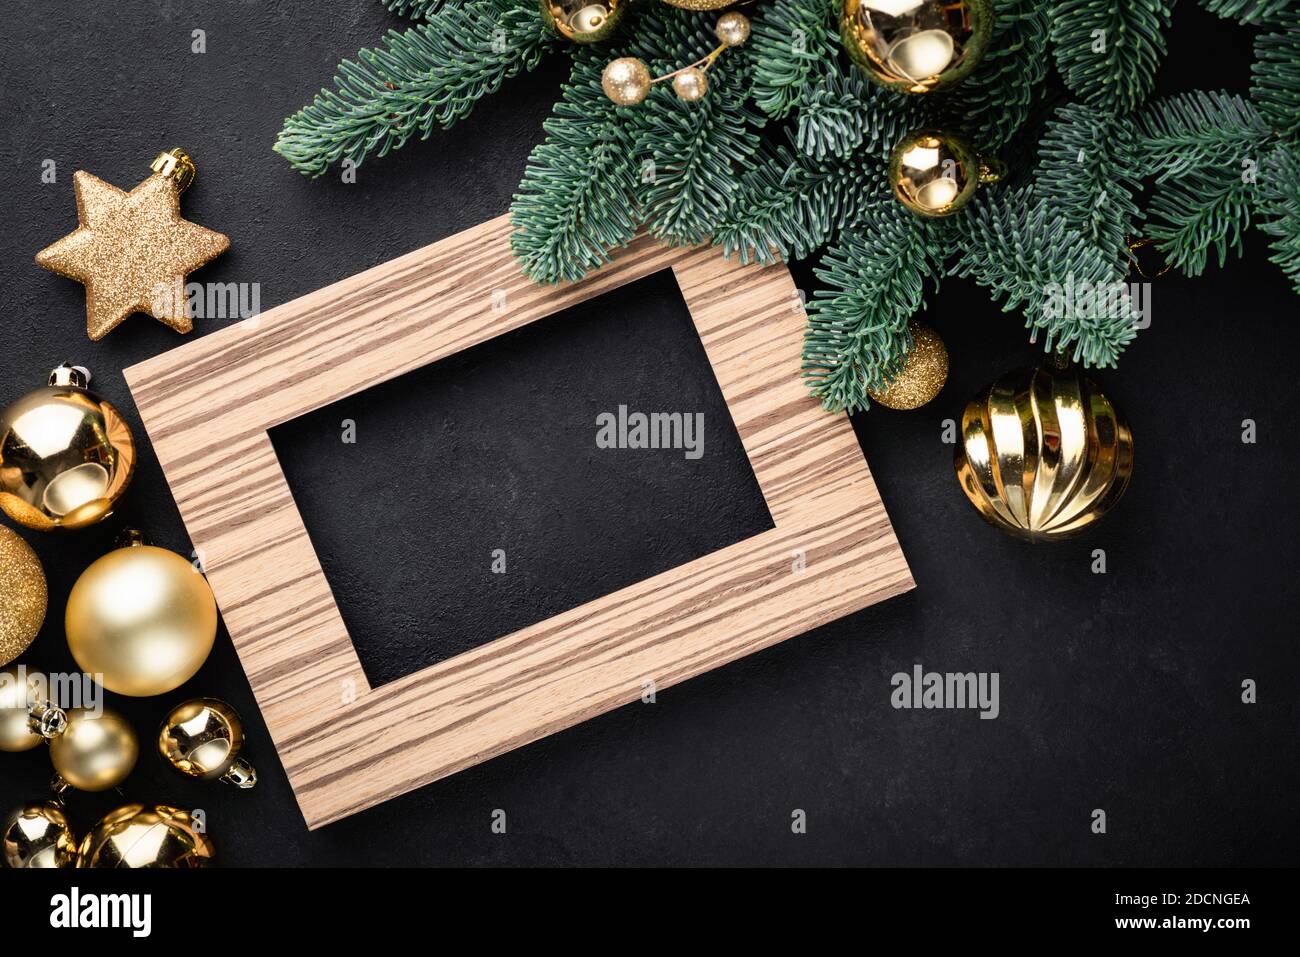 Christmas or New Year background with empty photo frame, fir tree and golden Christmas toys on black background Stock Photo